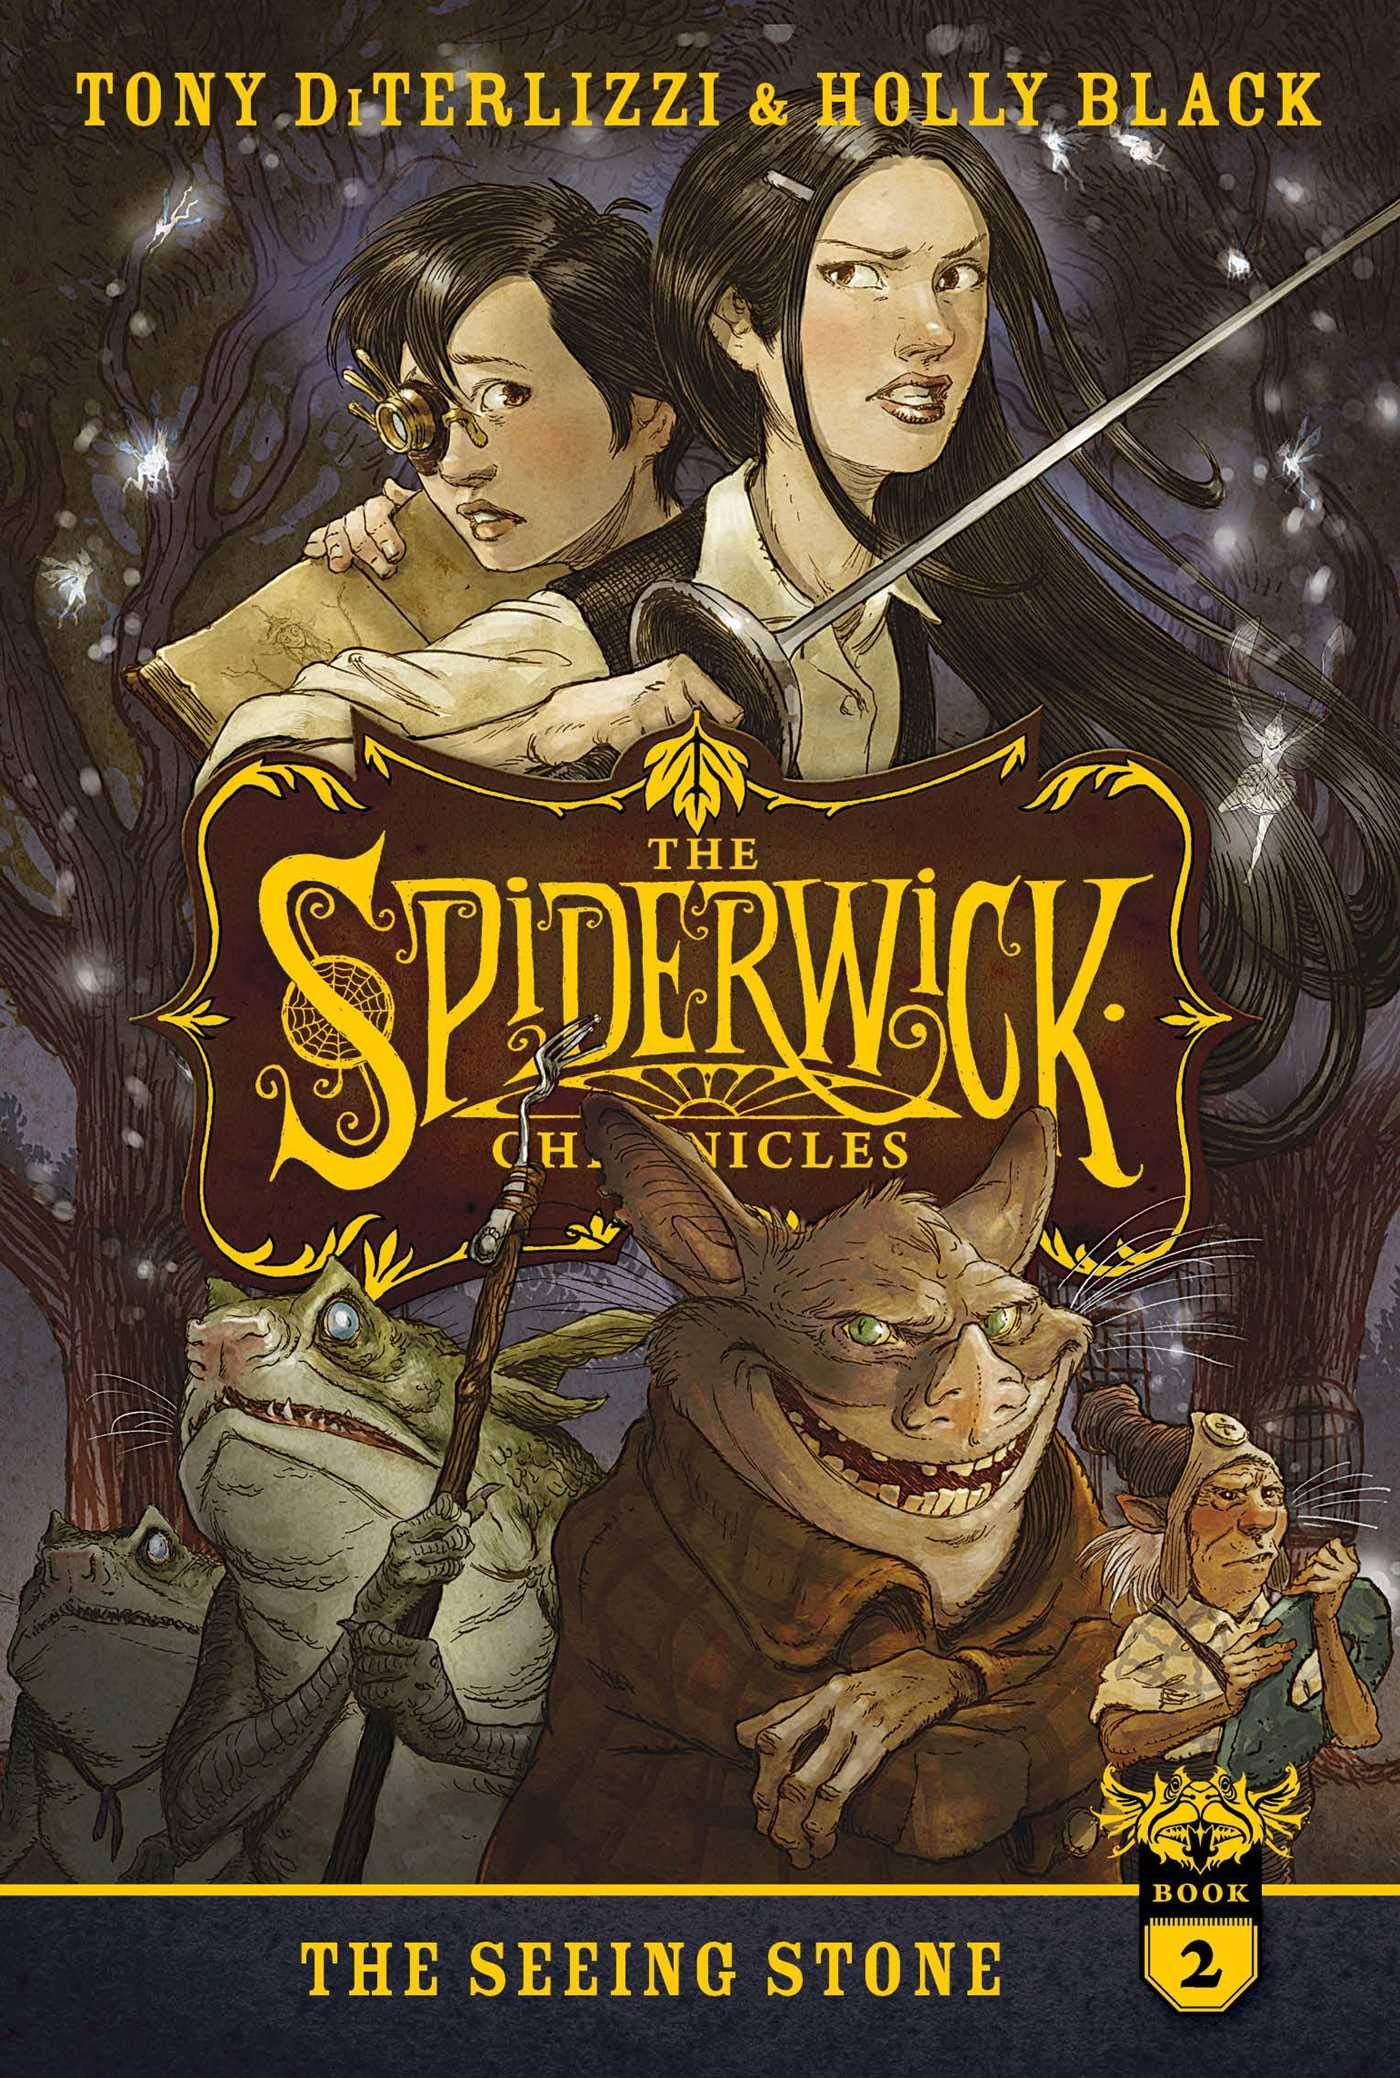 IMG : The Spiderwick Chronicles The Seeing Stone#2